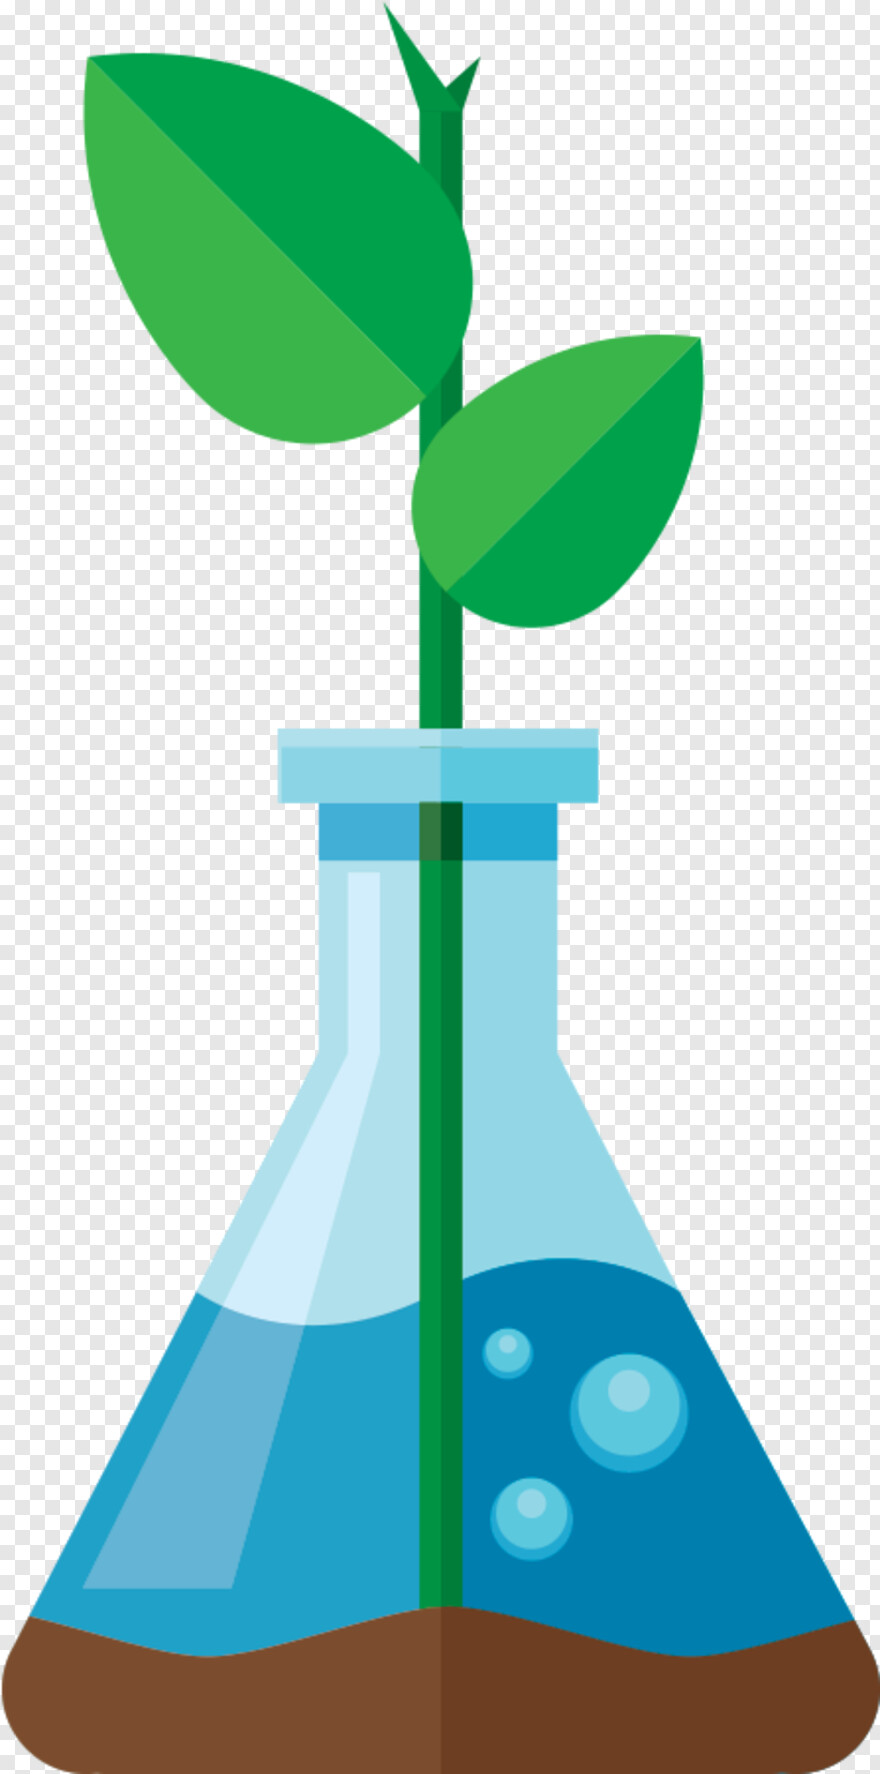  Download On The App Store, Research Icon, Science Clipart, Science, Science Icon, Download Button